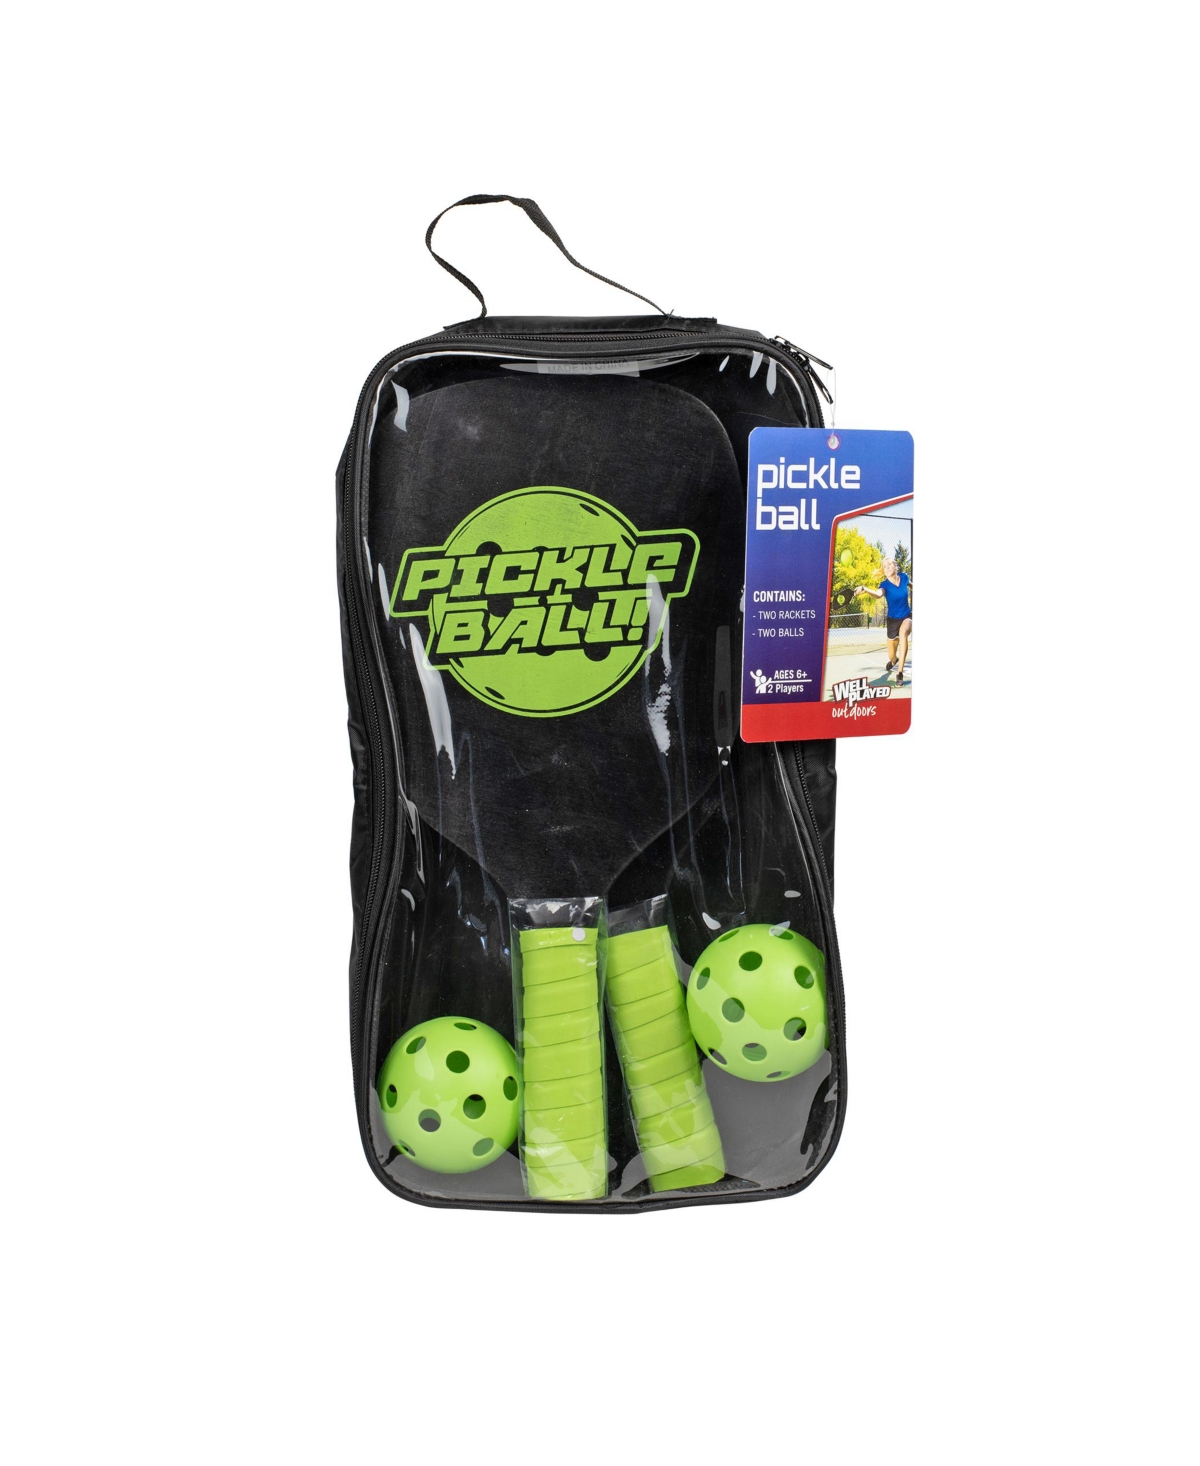 Pickle Ball with Carry Bag Set, 4 Pieces - Multi